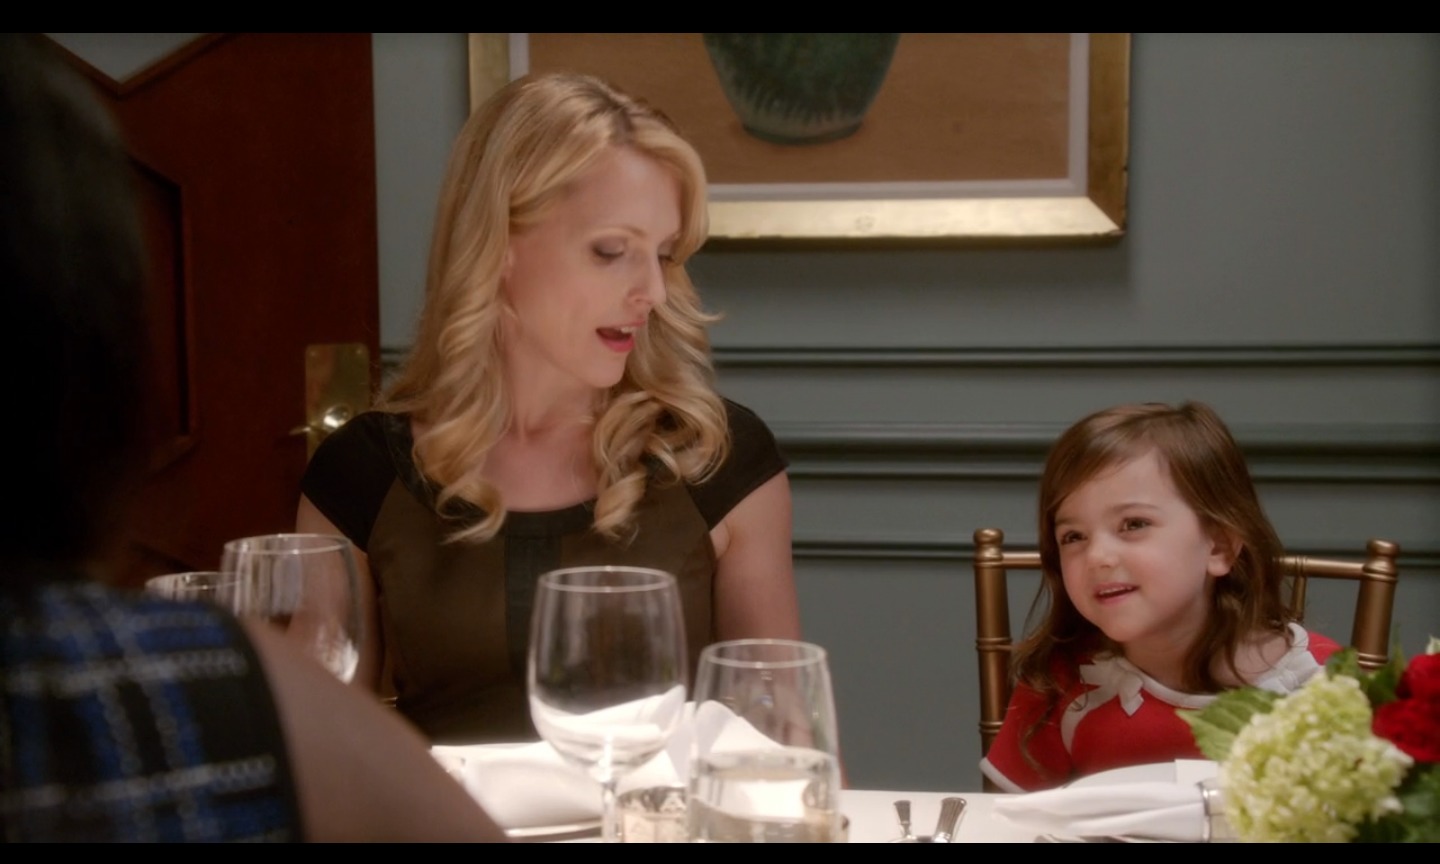 Abby Ryder Fortson stars as young Clementine questioning Mindy Kaling about her singleness at a dinner party in the episode, SK8er Man, on The Mindy Project .